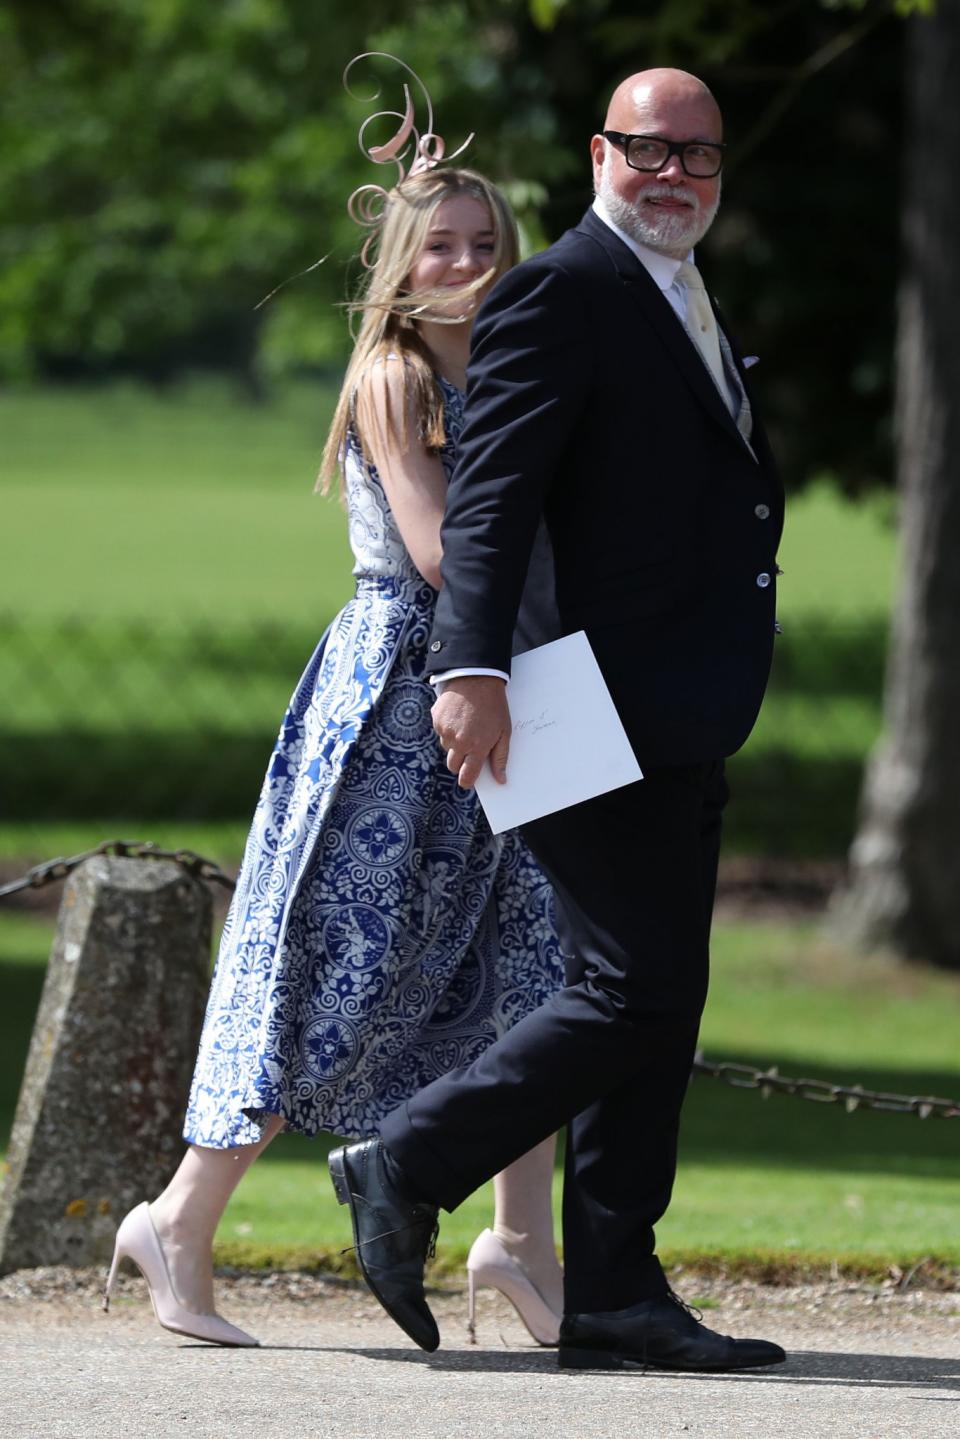 <p>Pippa’s uncle arrived in a traditional suit with his daughter opting for a printed blue-and-white dress.<br><i>[Photo: PA]</i> </p>